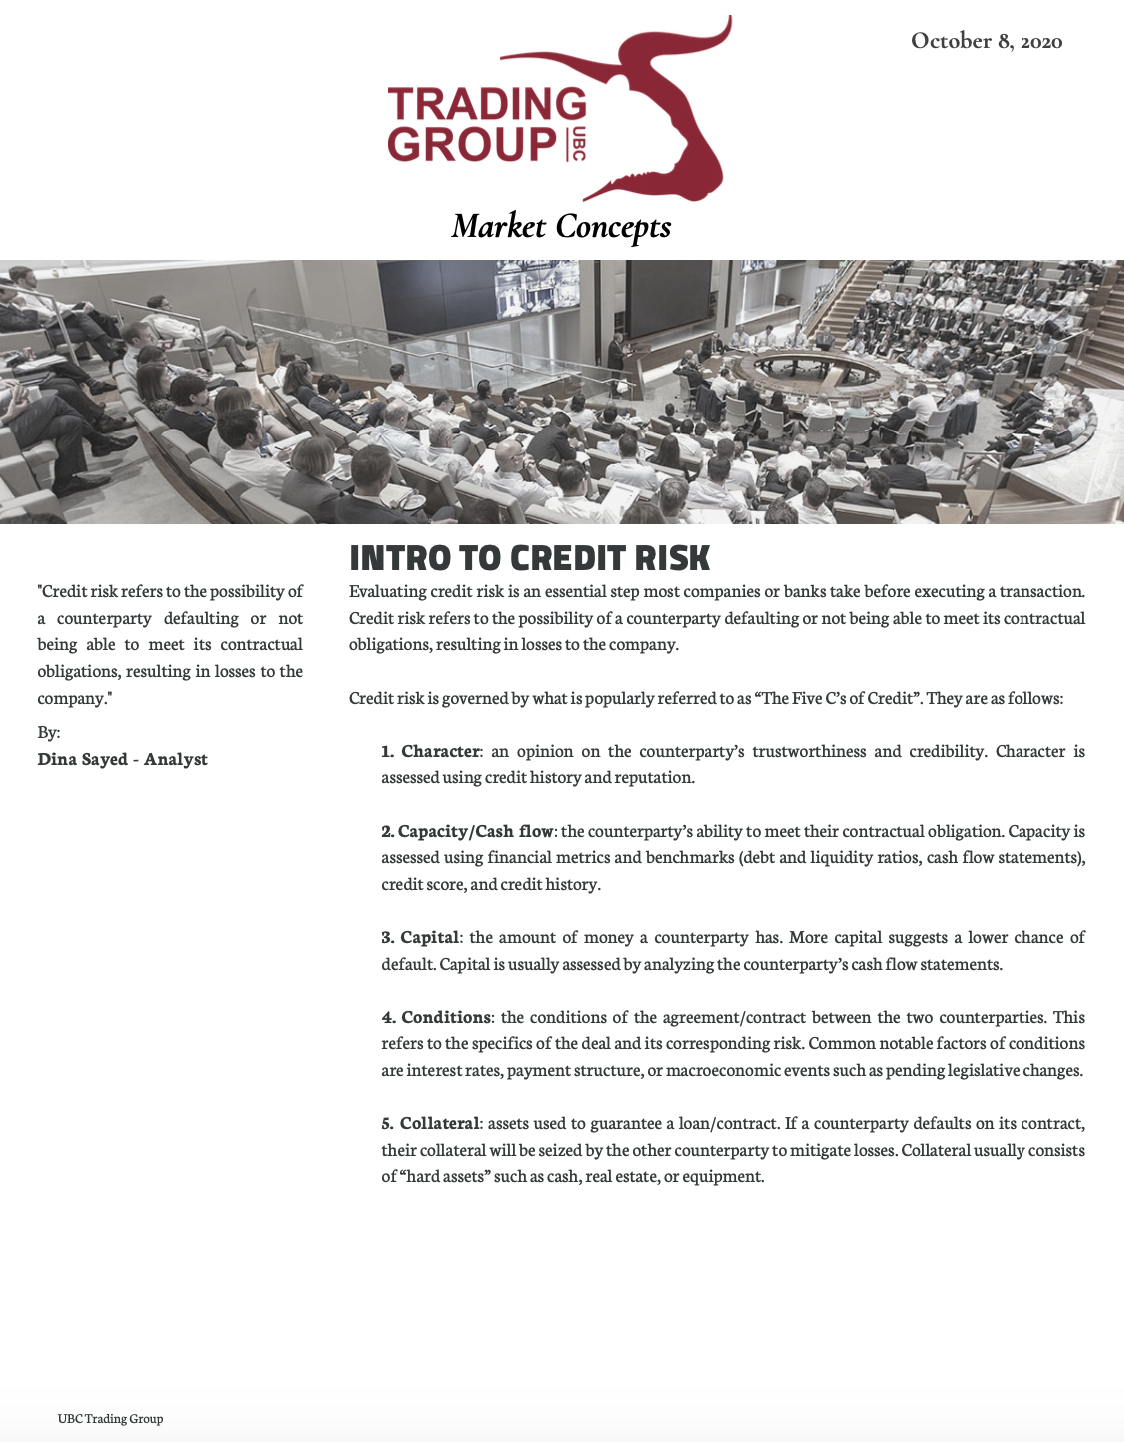 Intro to Credit Risk